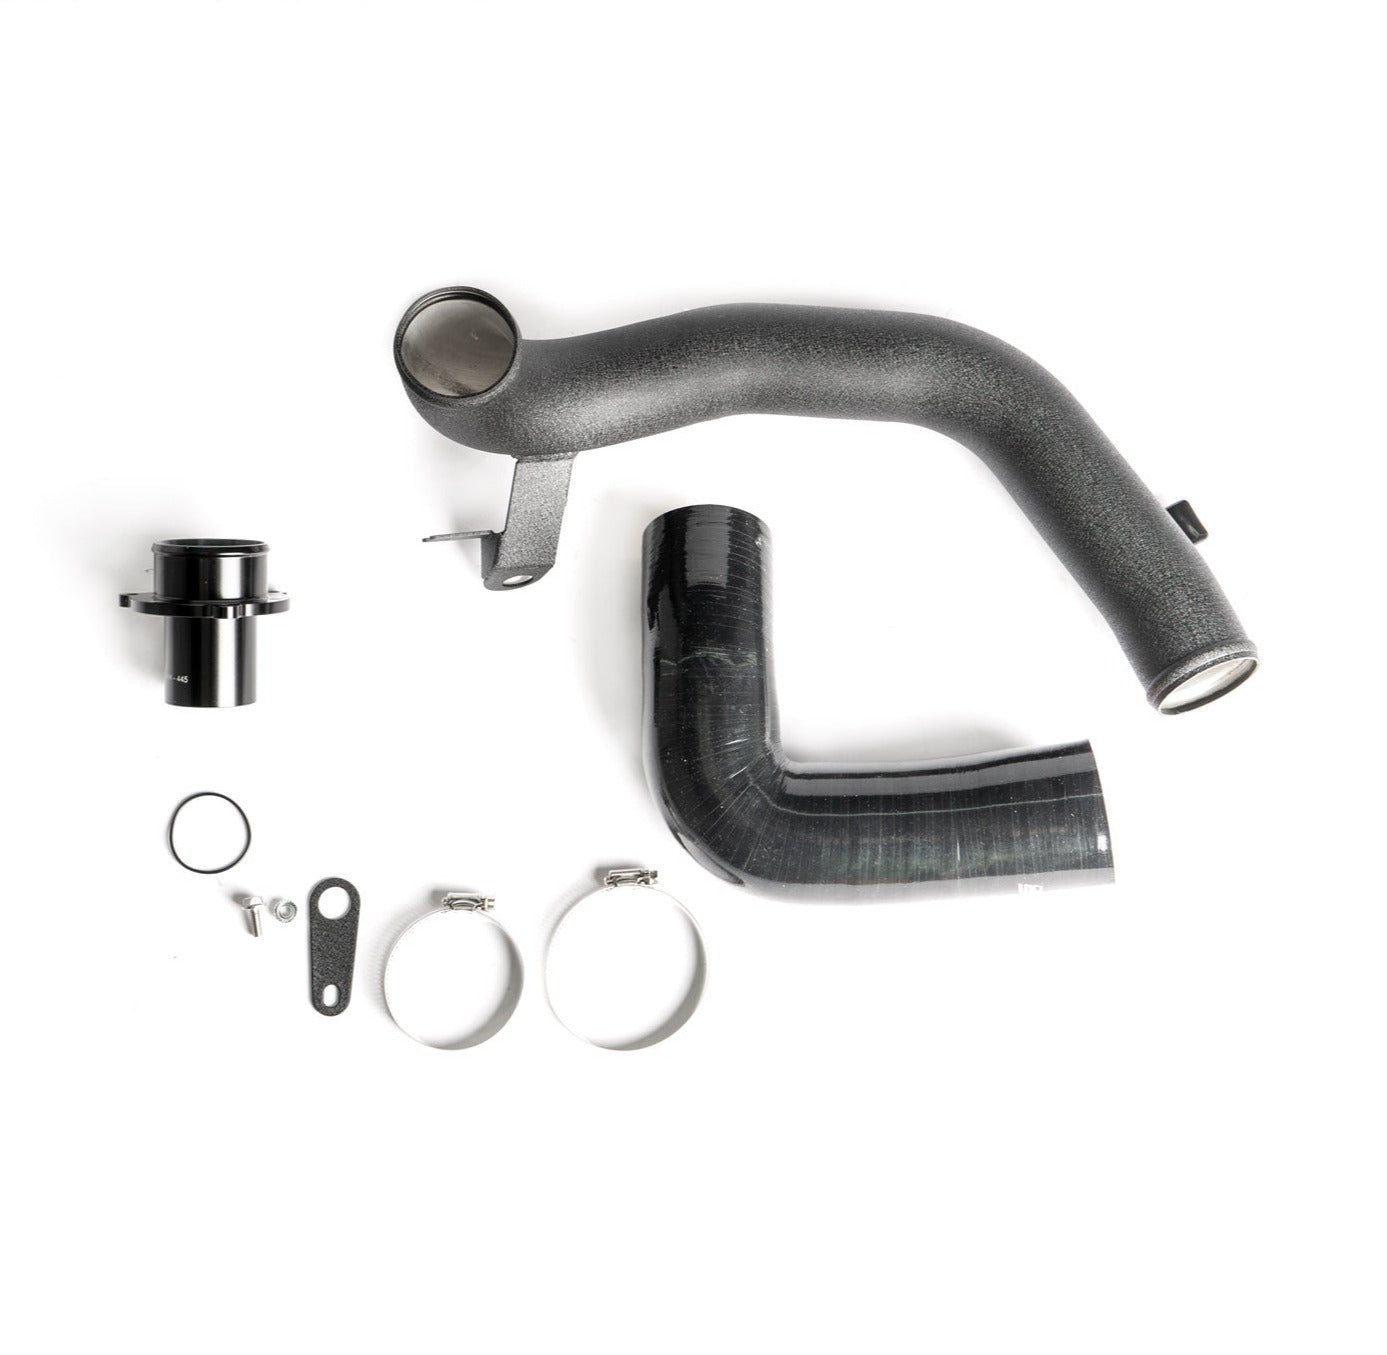 CTS Turbo 2.5" Turbo Outlet Pipe - For BOSS Kits/Hybrid Turbos